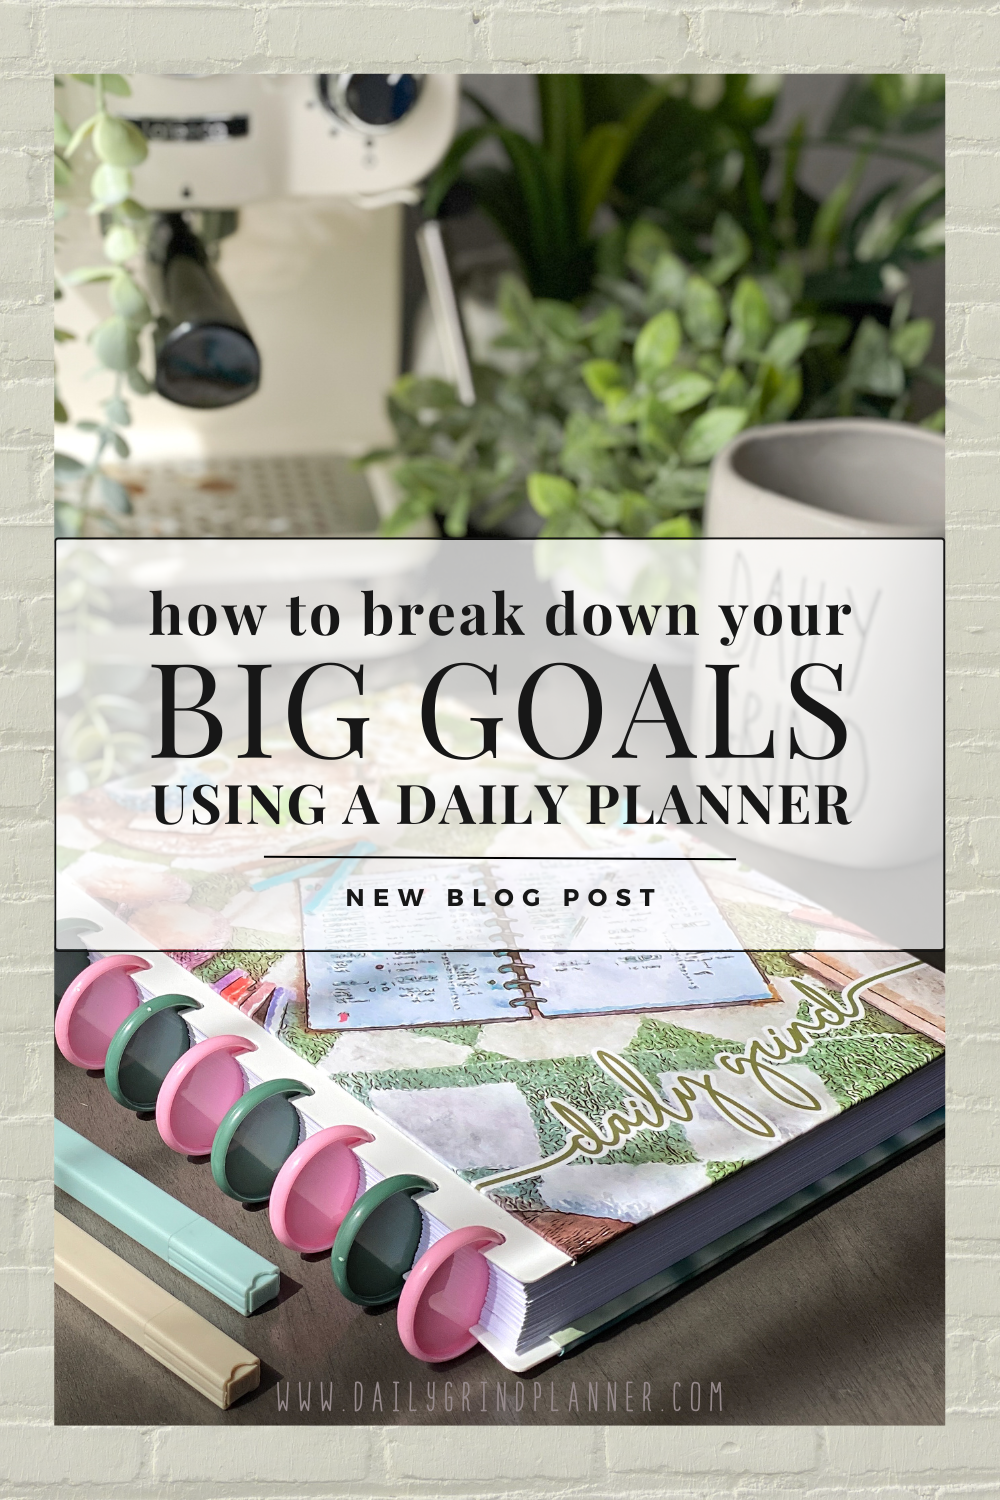 HOW TO BREAK DOWN YOUR BIG GOALS USING A DAILY PLANNER